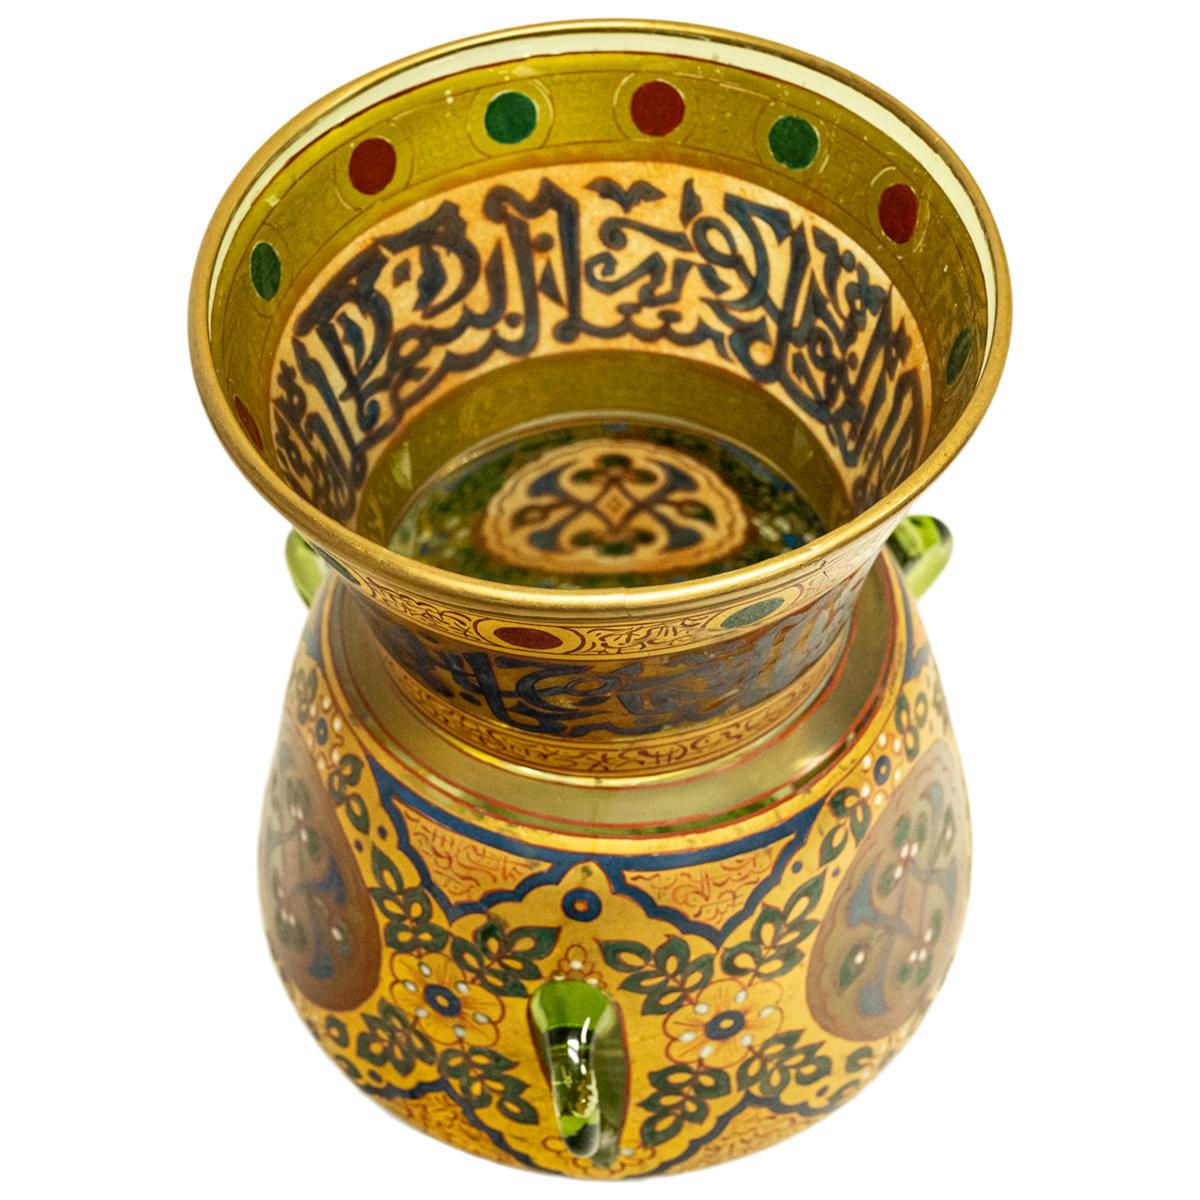 Antique French Islamic Glass Enamel Gilt Mamluk Revival Mosque Lamp Brocard 1880 For Sale 10